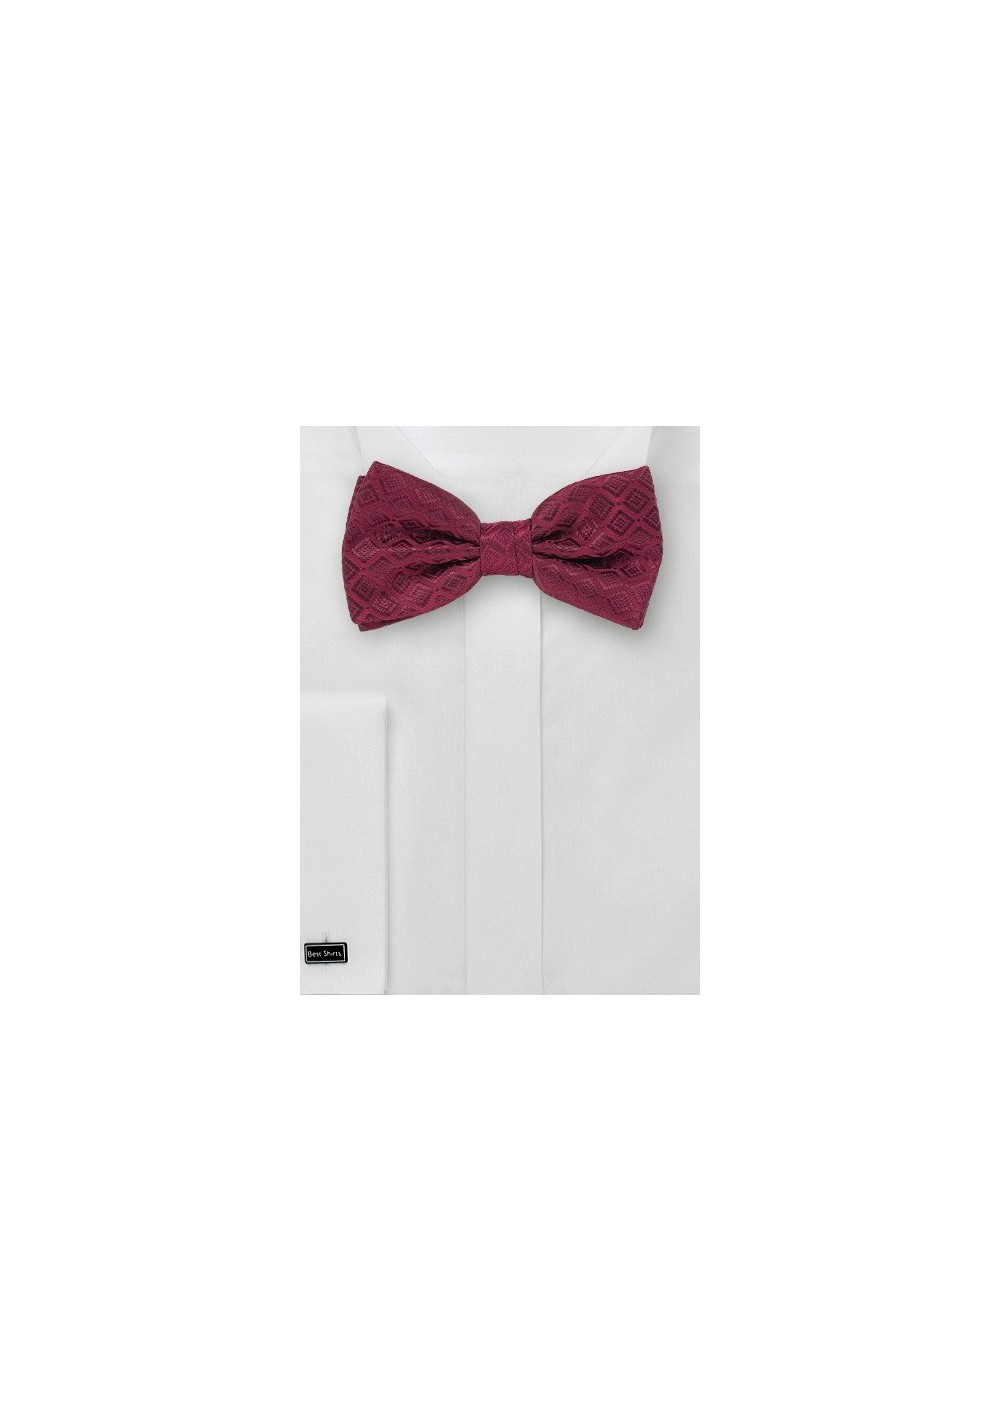 Wine Red Bow Ties - Bow Tie Set With Matching Pocket Square